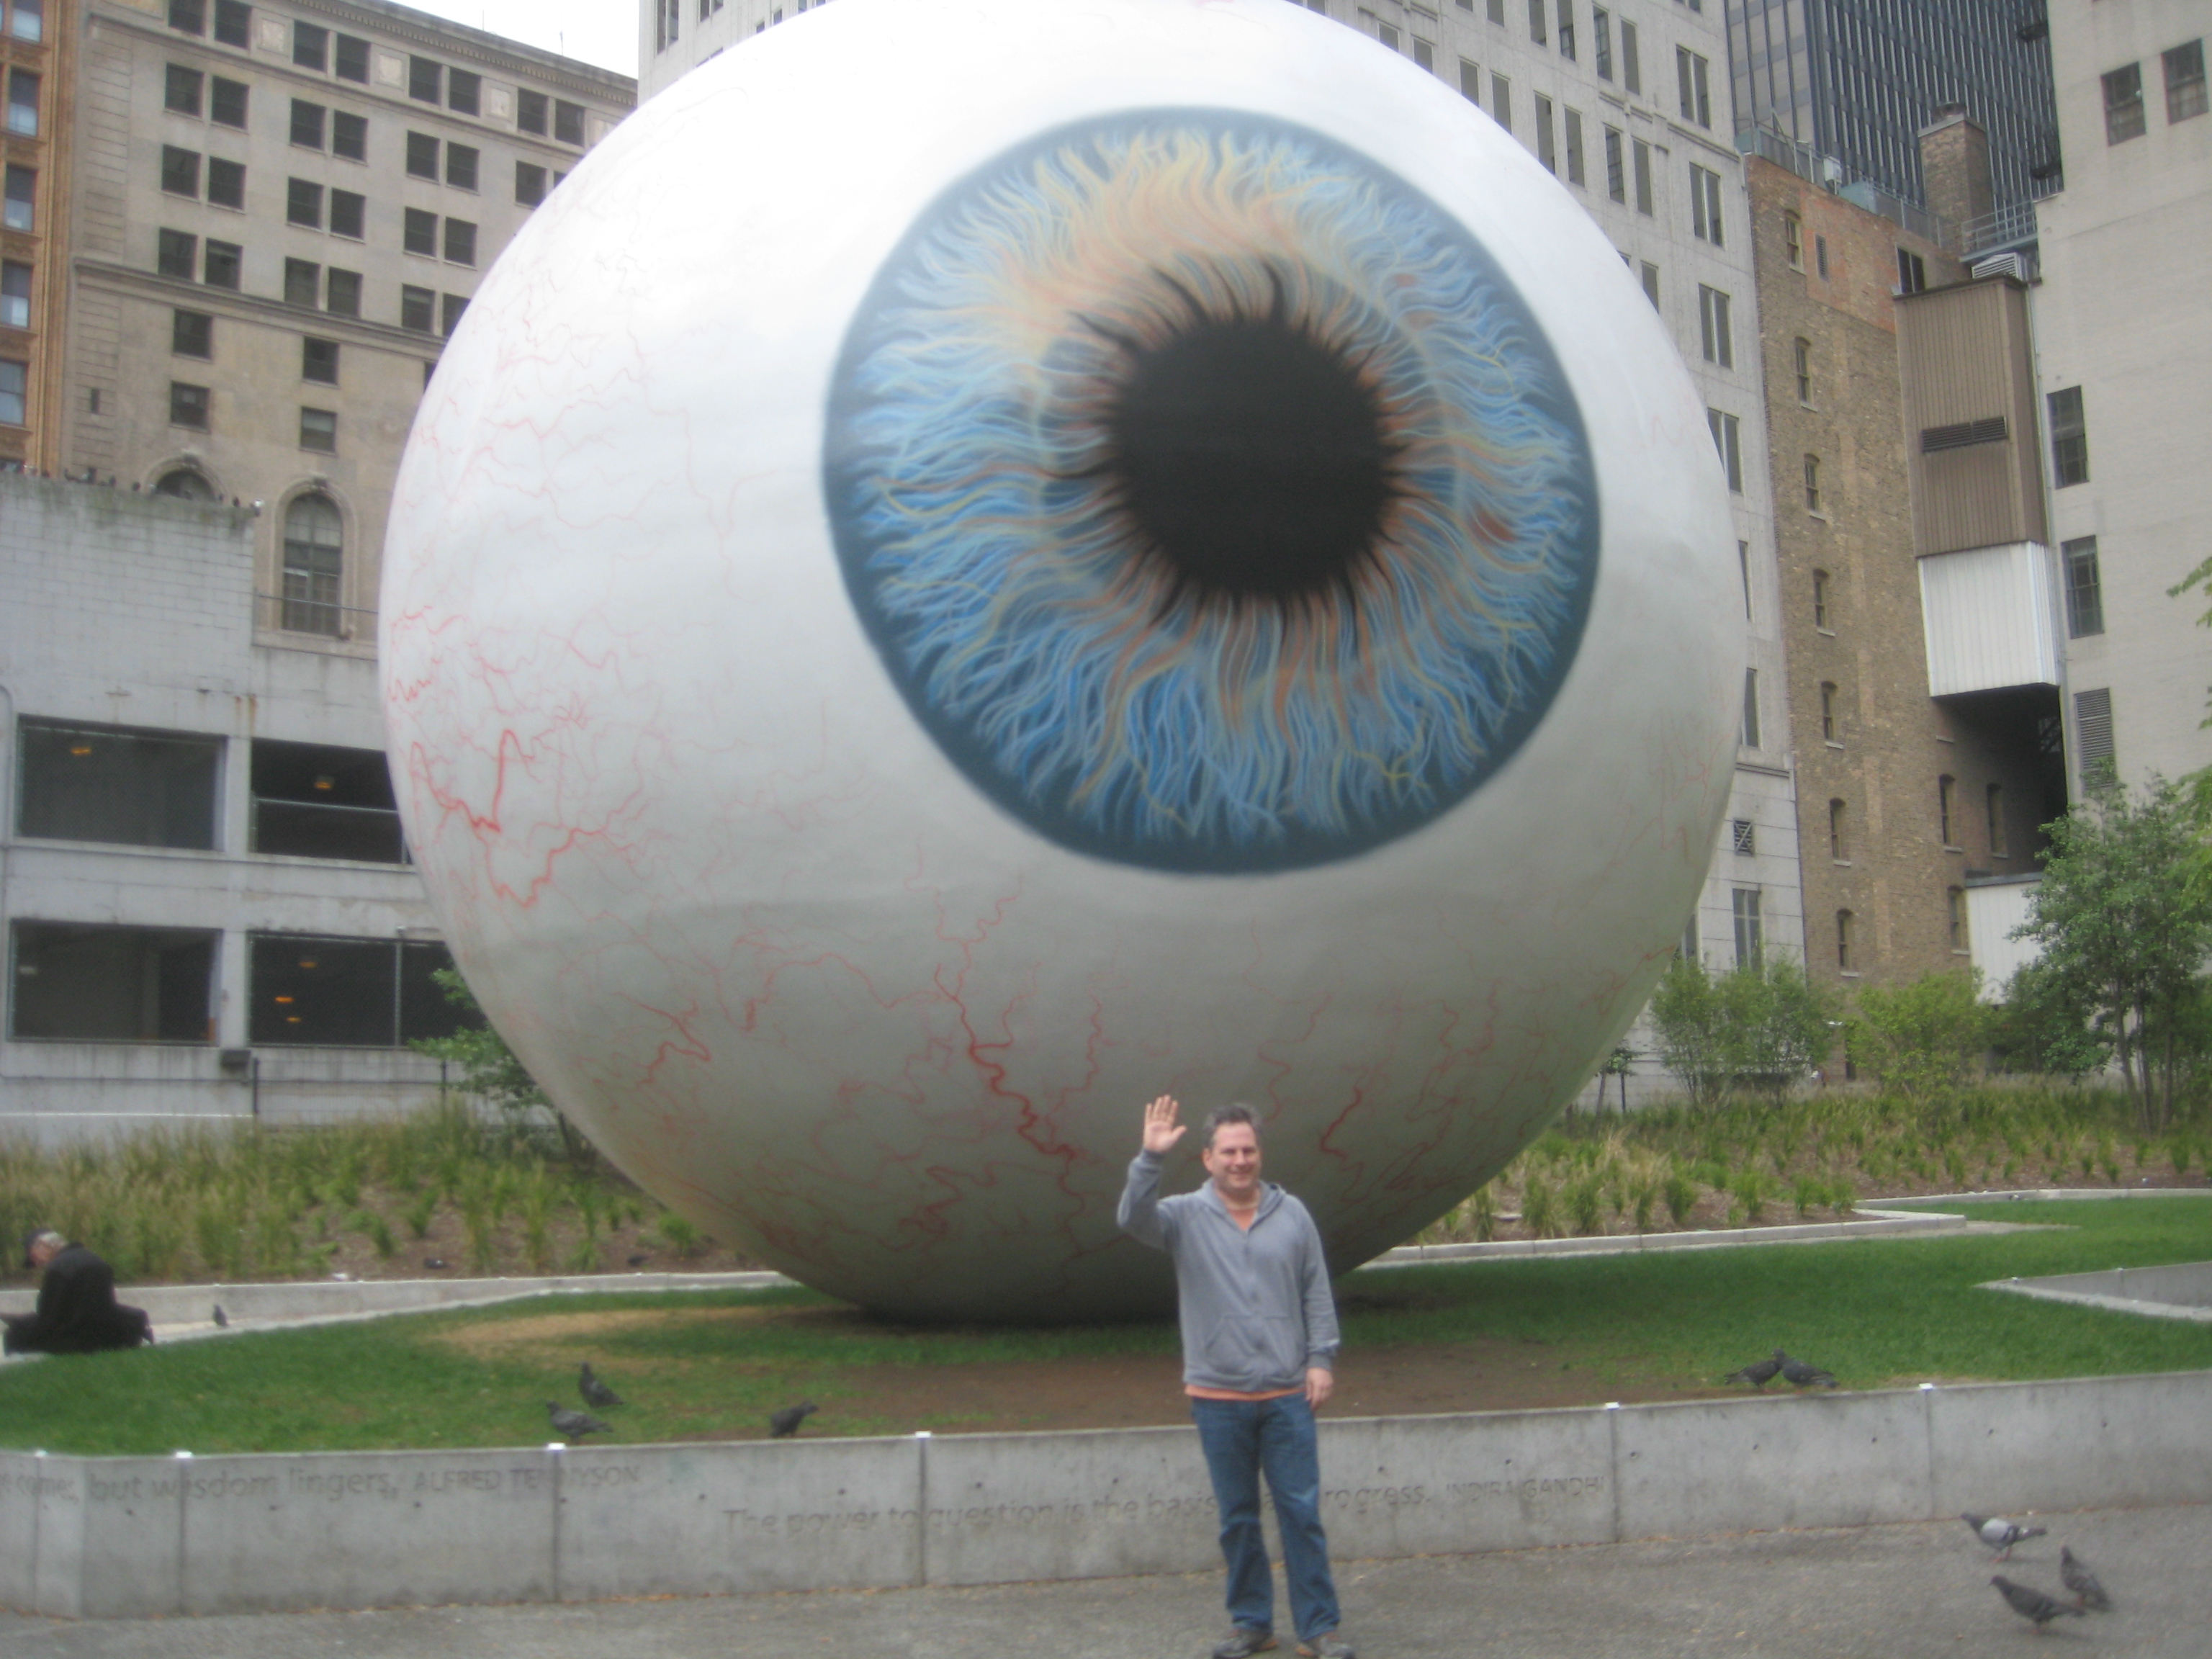 Gentleman Unafraid › Some see the giant eyeball that is. I see the ...